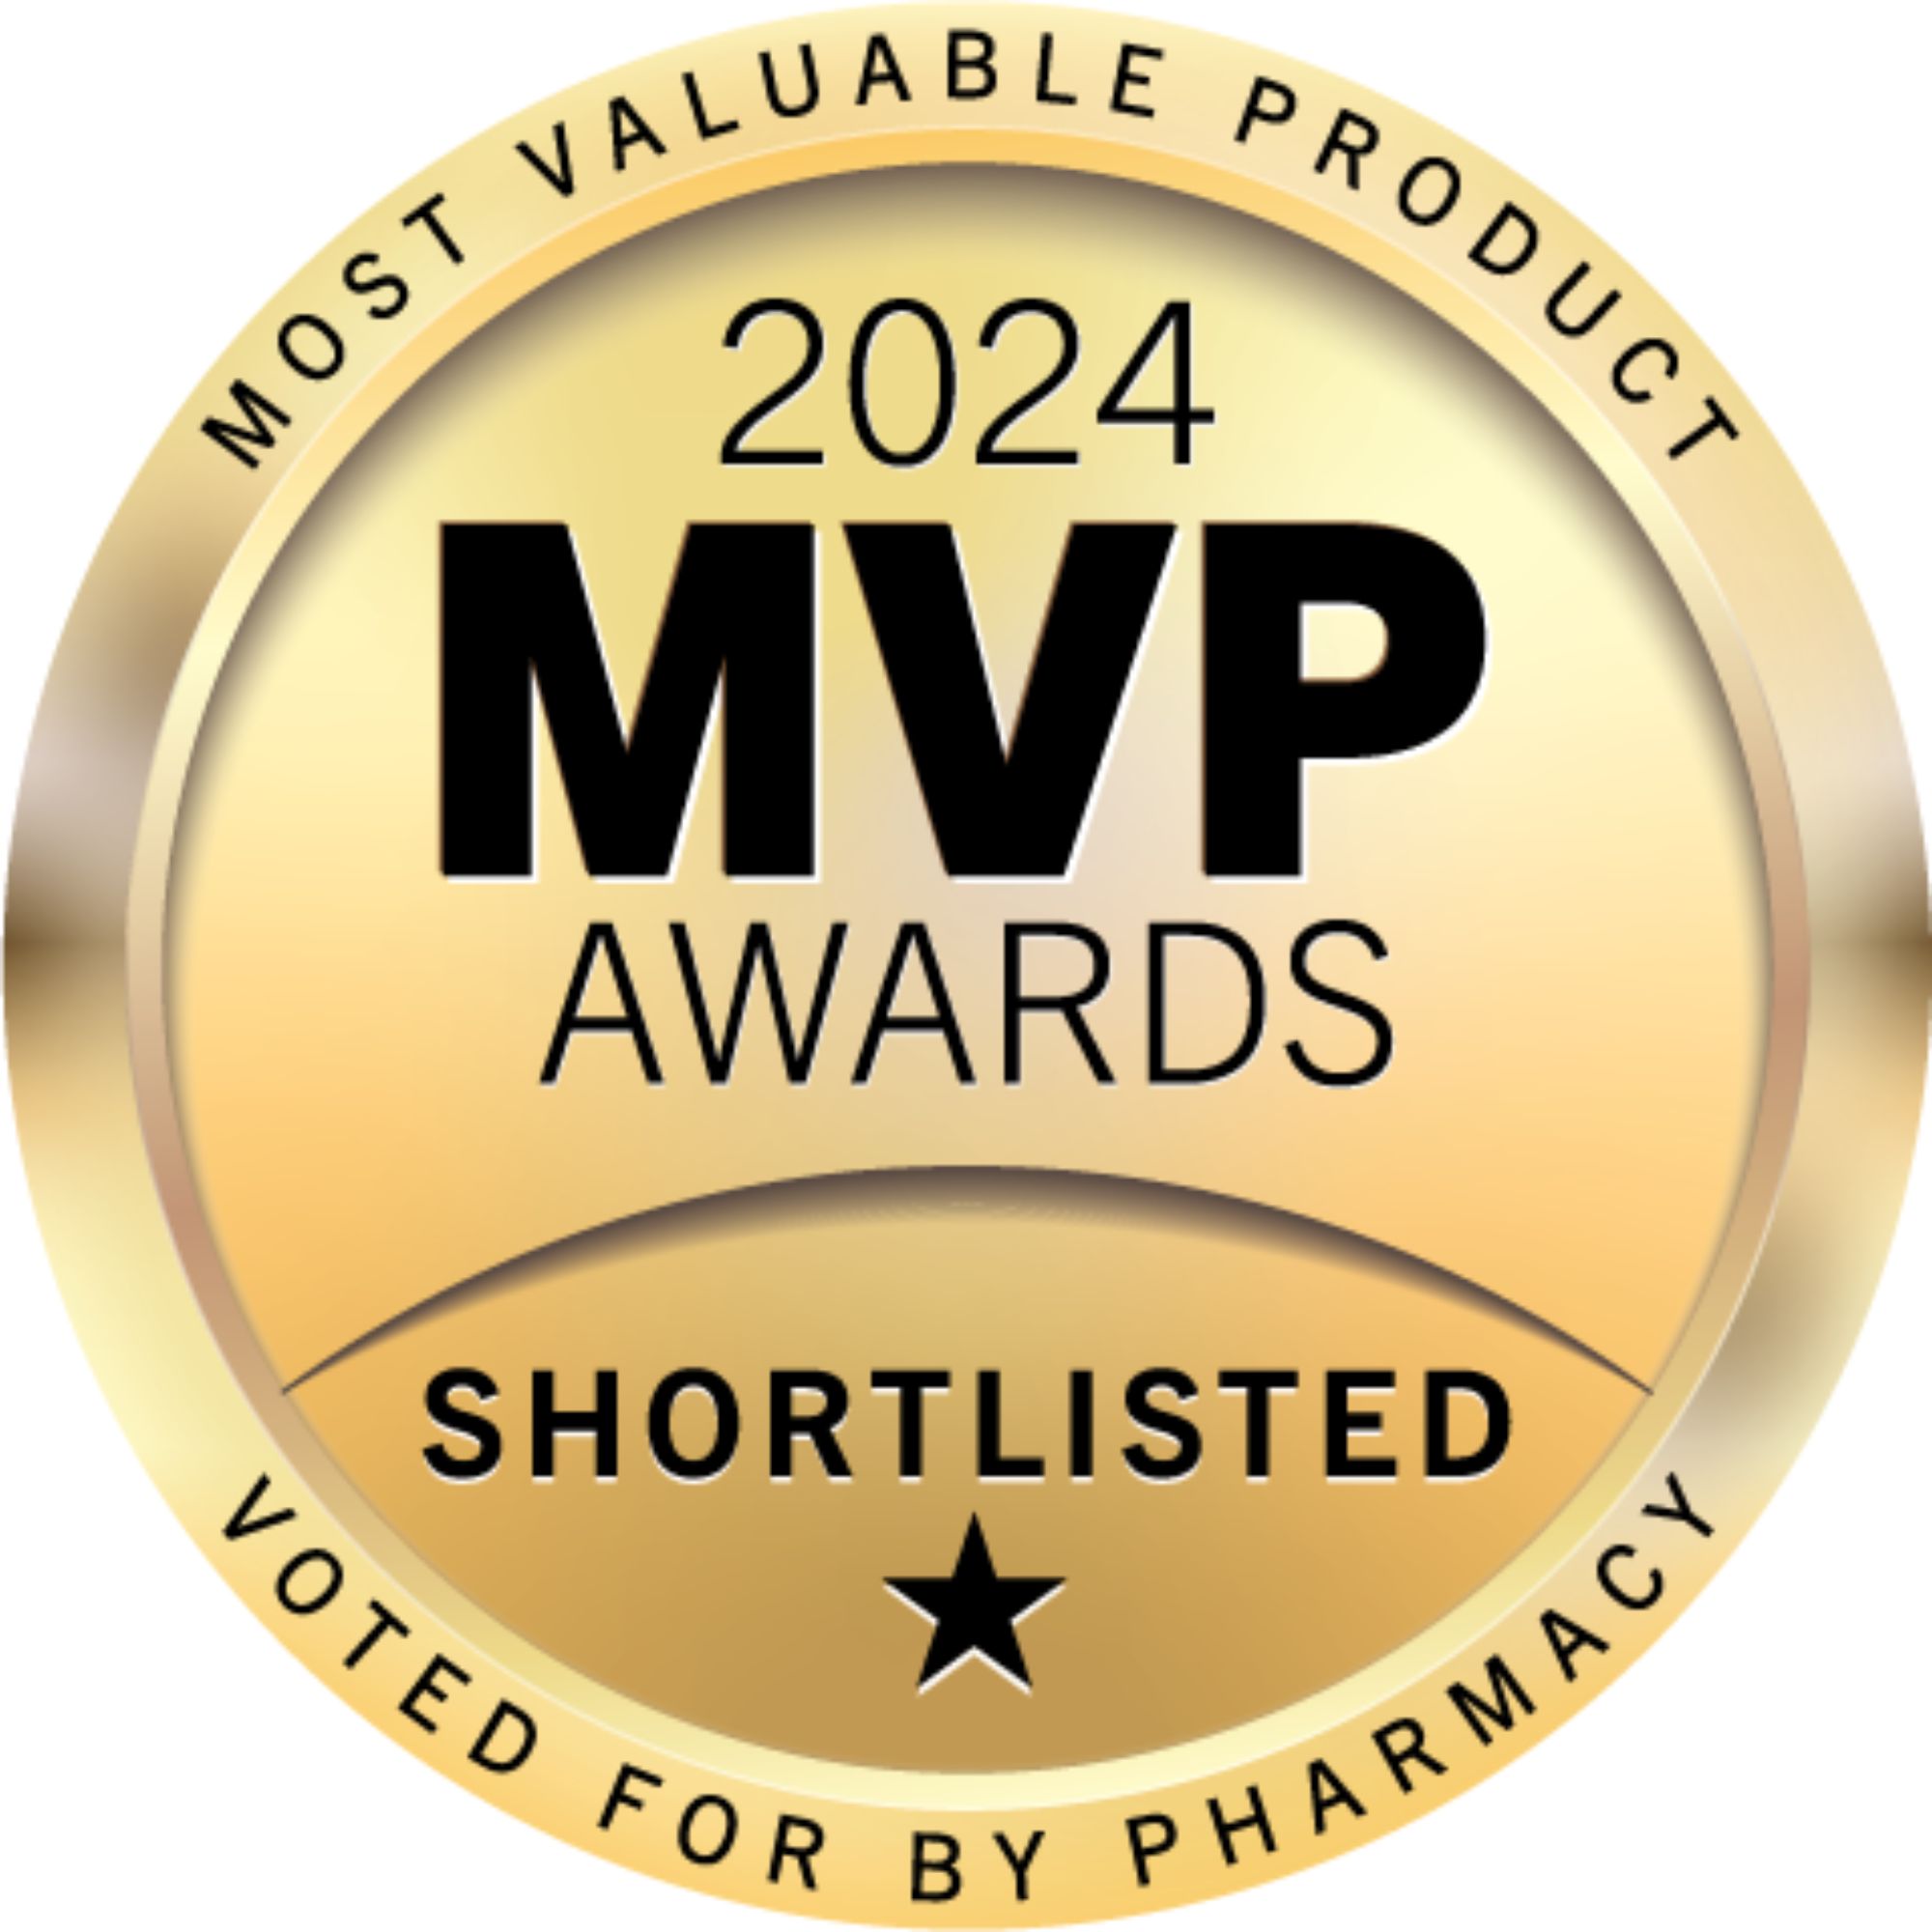 Most valuable product. 2024 MVP awards. shortlisted. voted for by pharmacy